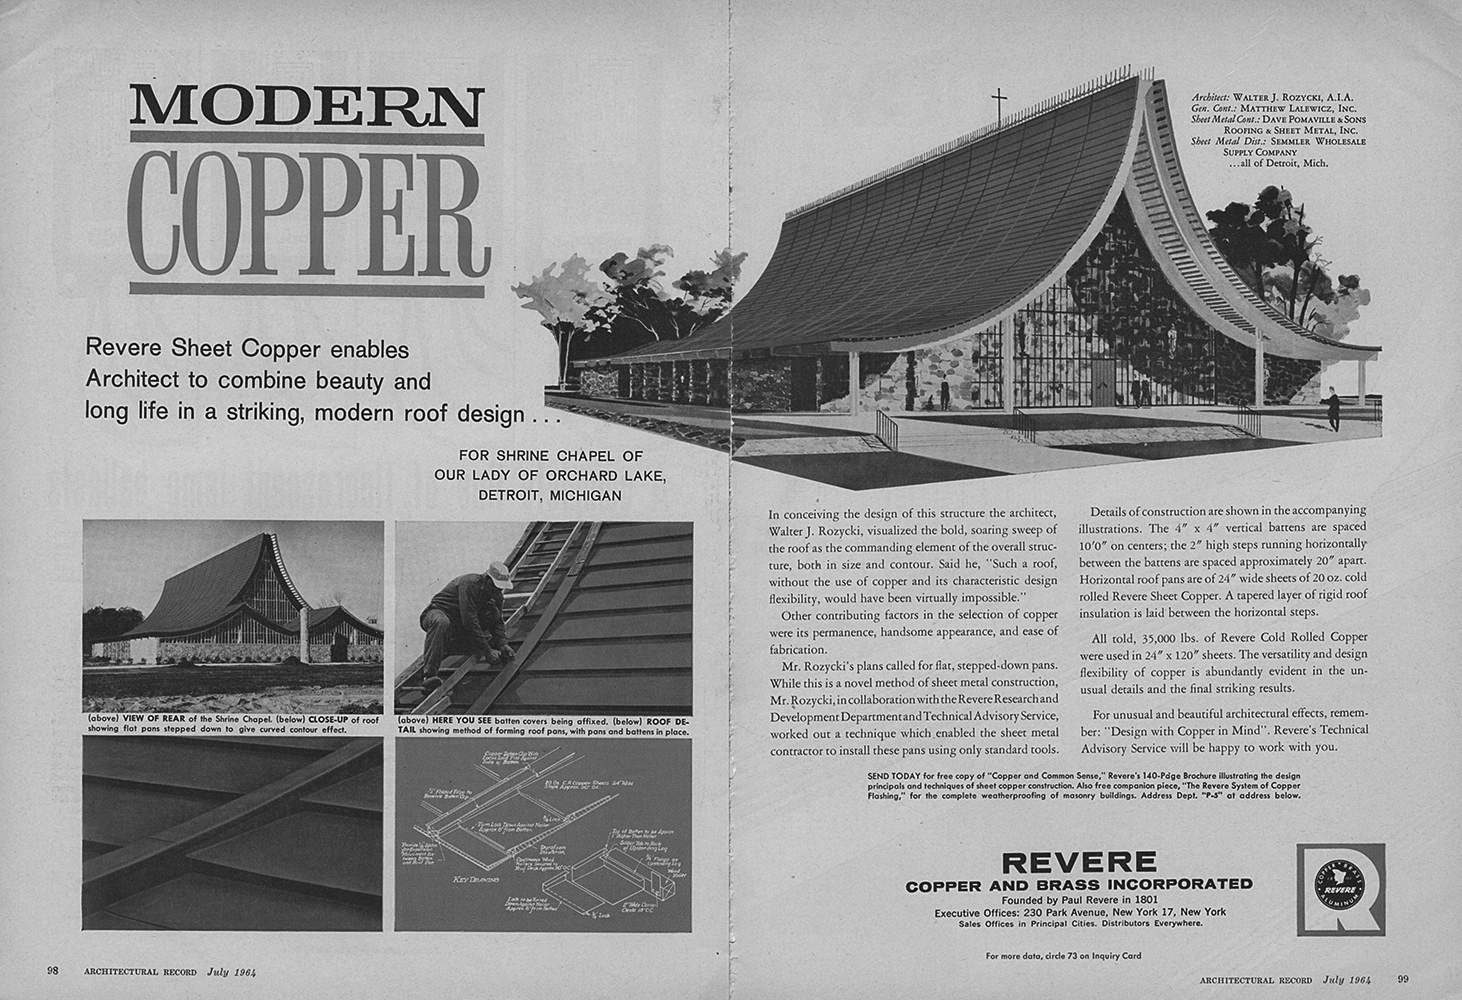 A black and white advertisement with 5 images and text that says Modern Copper. Revere Sheet Copper enables Architect to combine beauty and long life in a striking, modern, roof design...